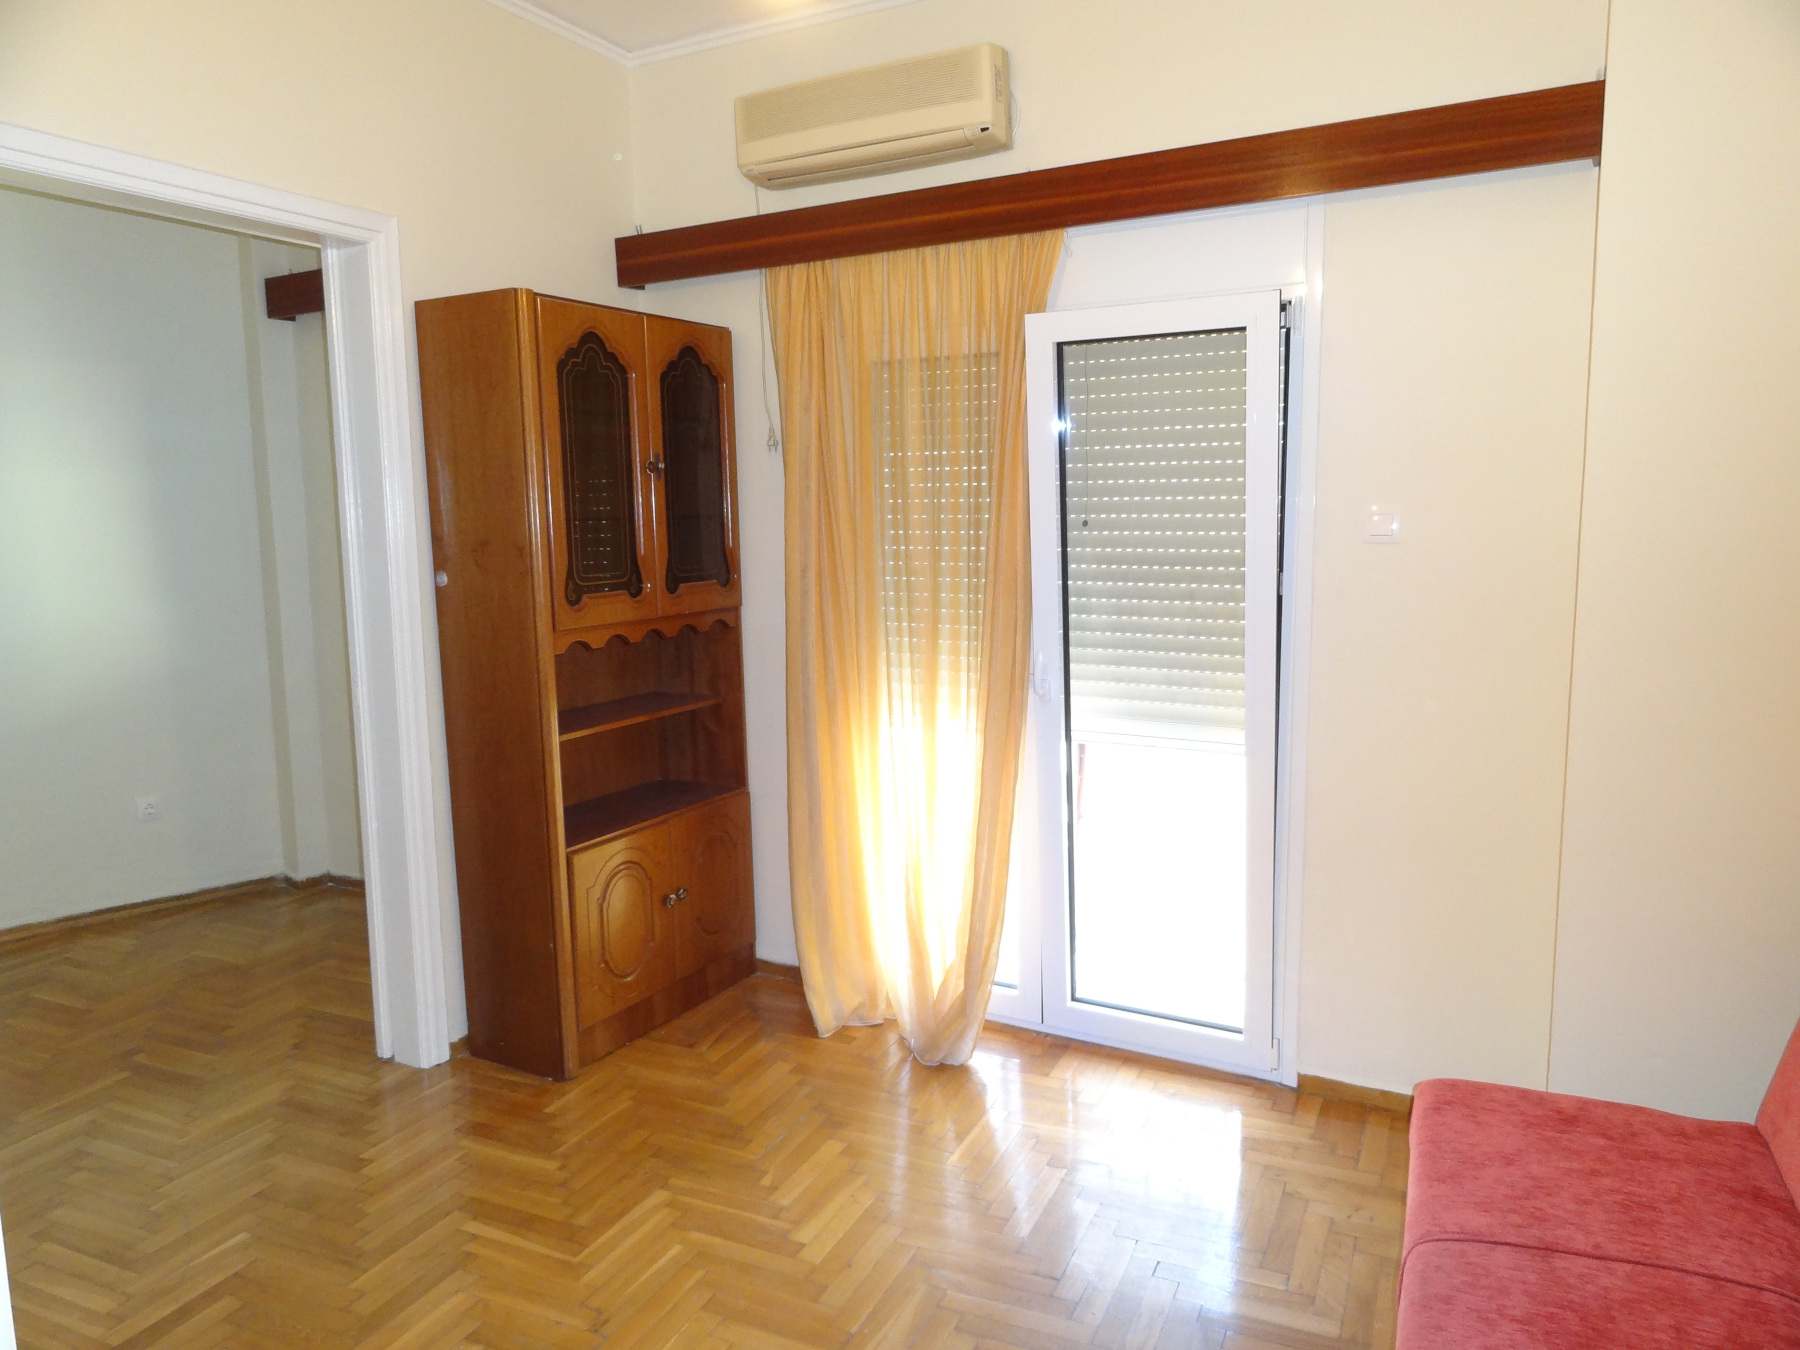 Spacious furnished 1 bedroom apartment for rent, 60 sq.m. 3rd floor in Pargi square in the center of Ioannina